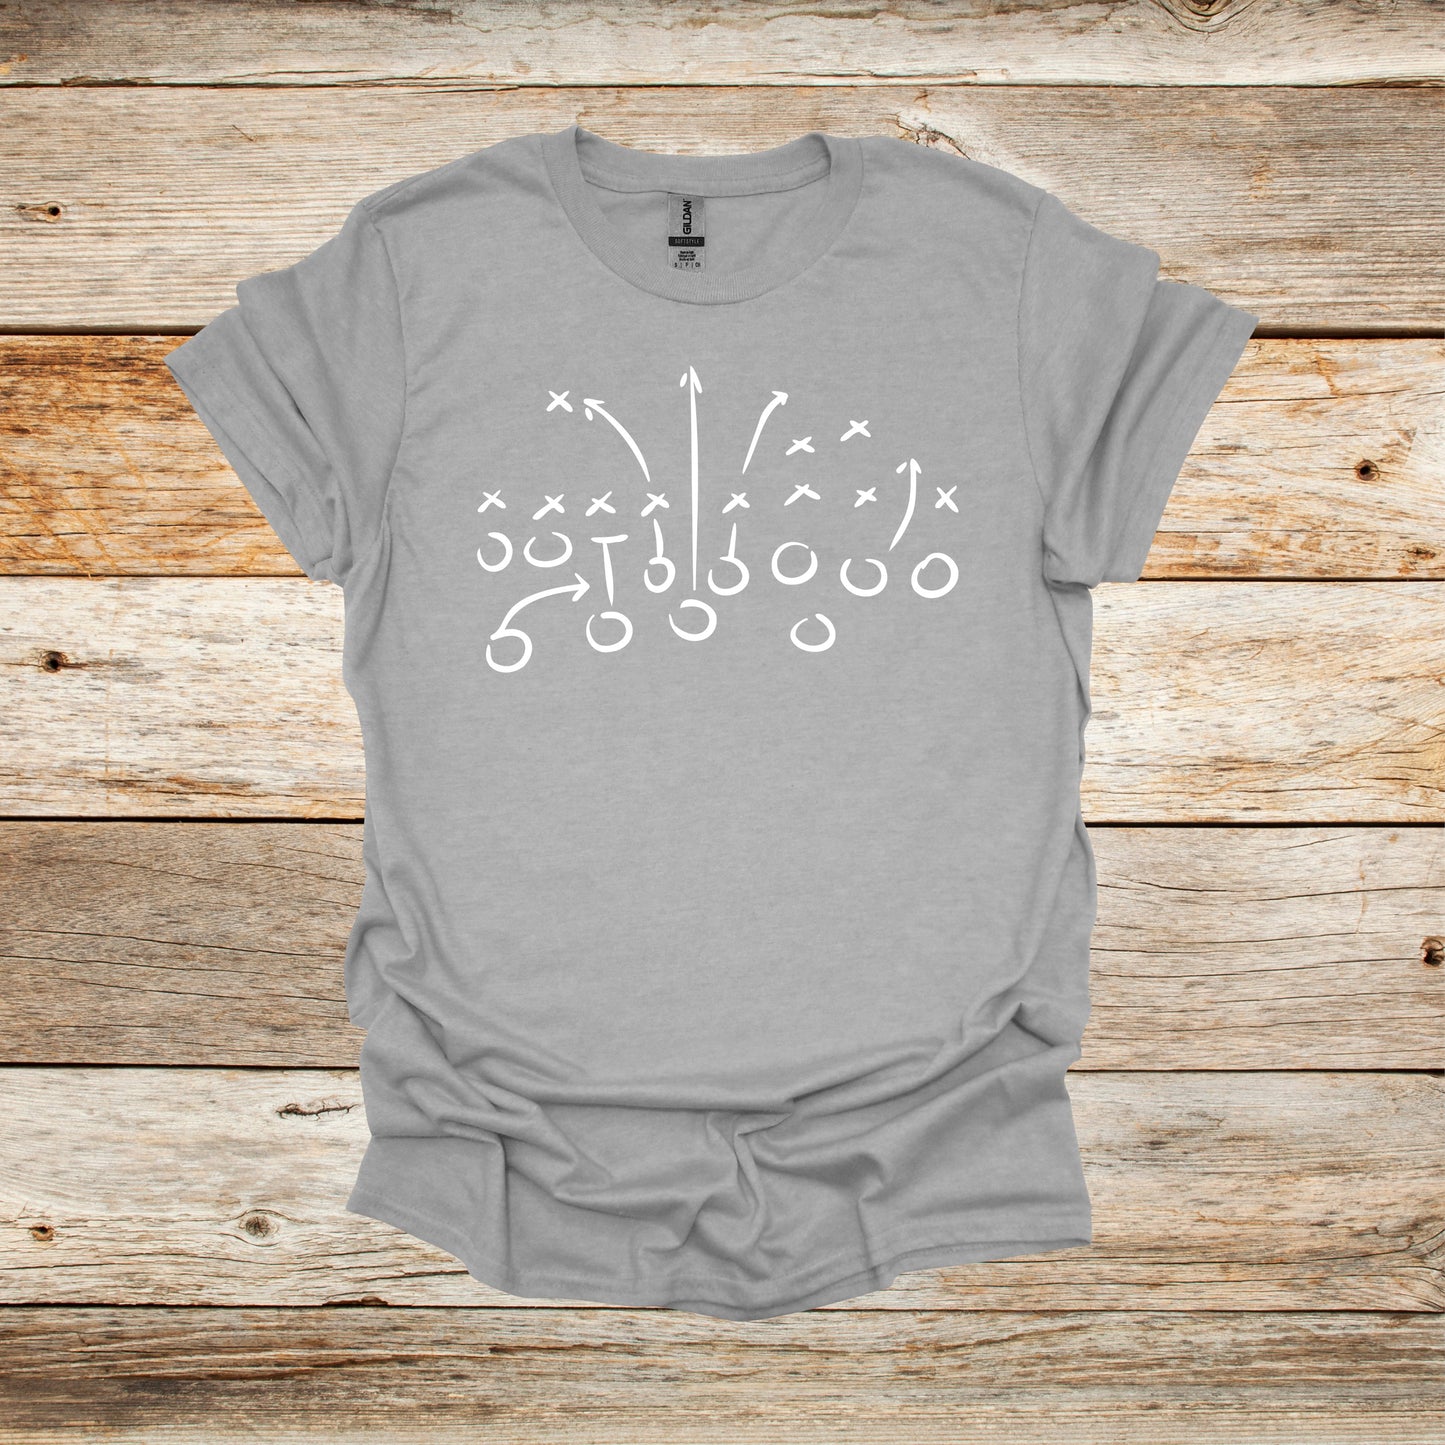 Football T-Shirt - Playbook - Adult and Children's Tee Shirts - Sports T-Shirts Graphic Avenue Sport Grey Adult Small 